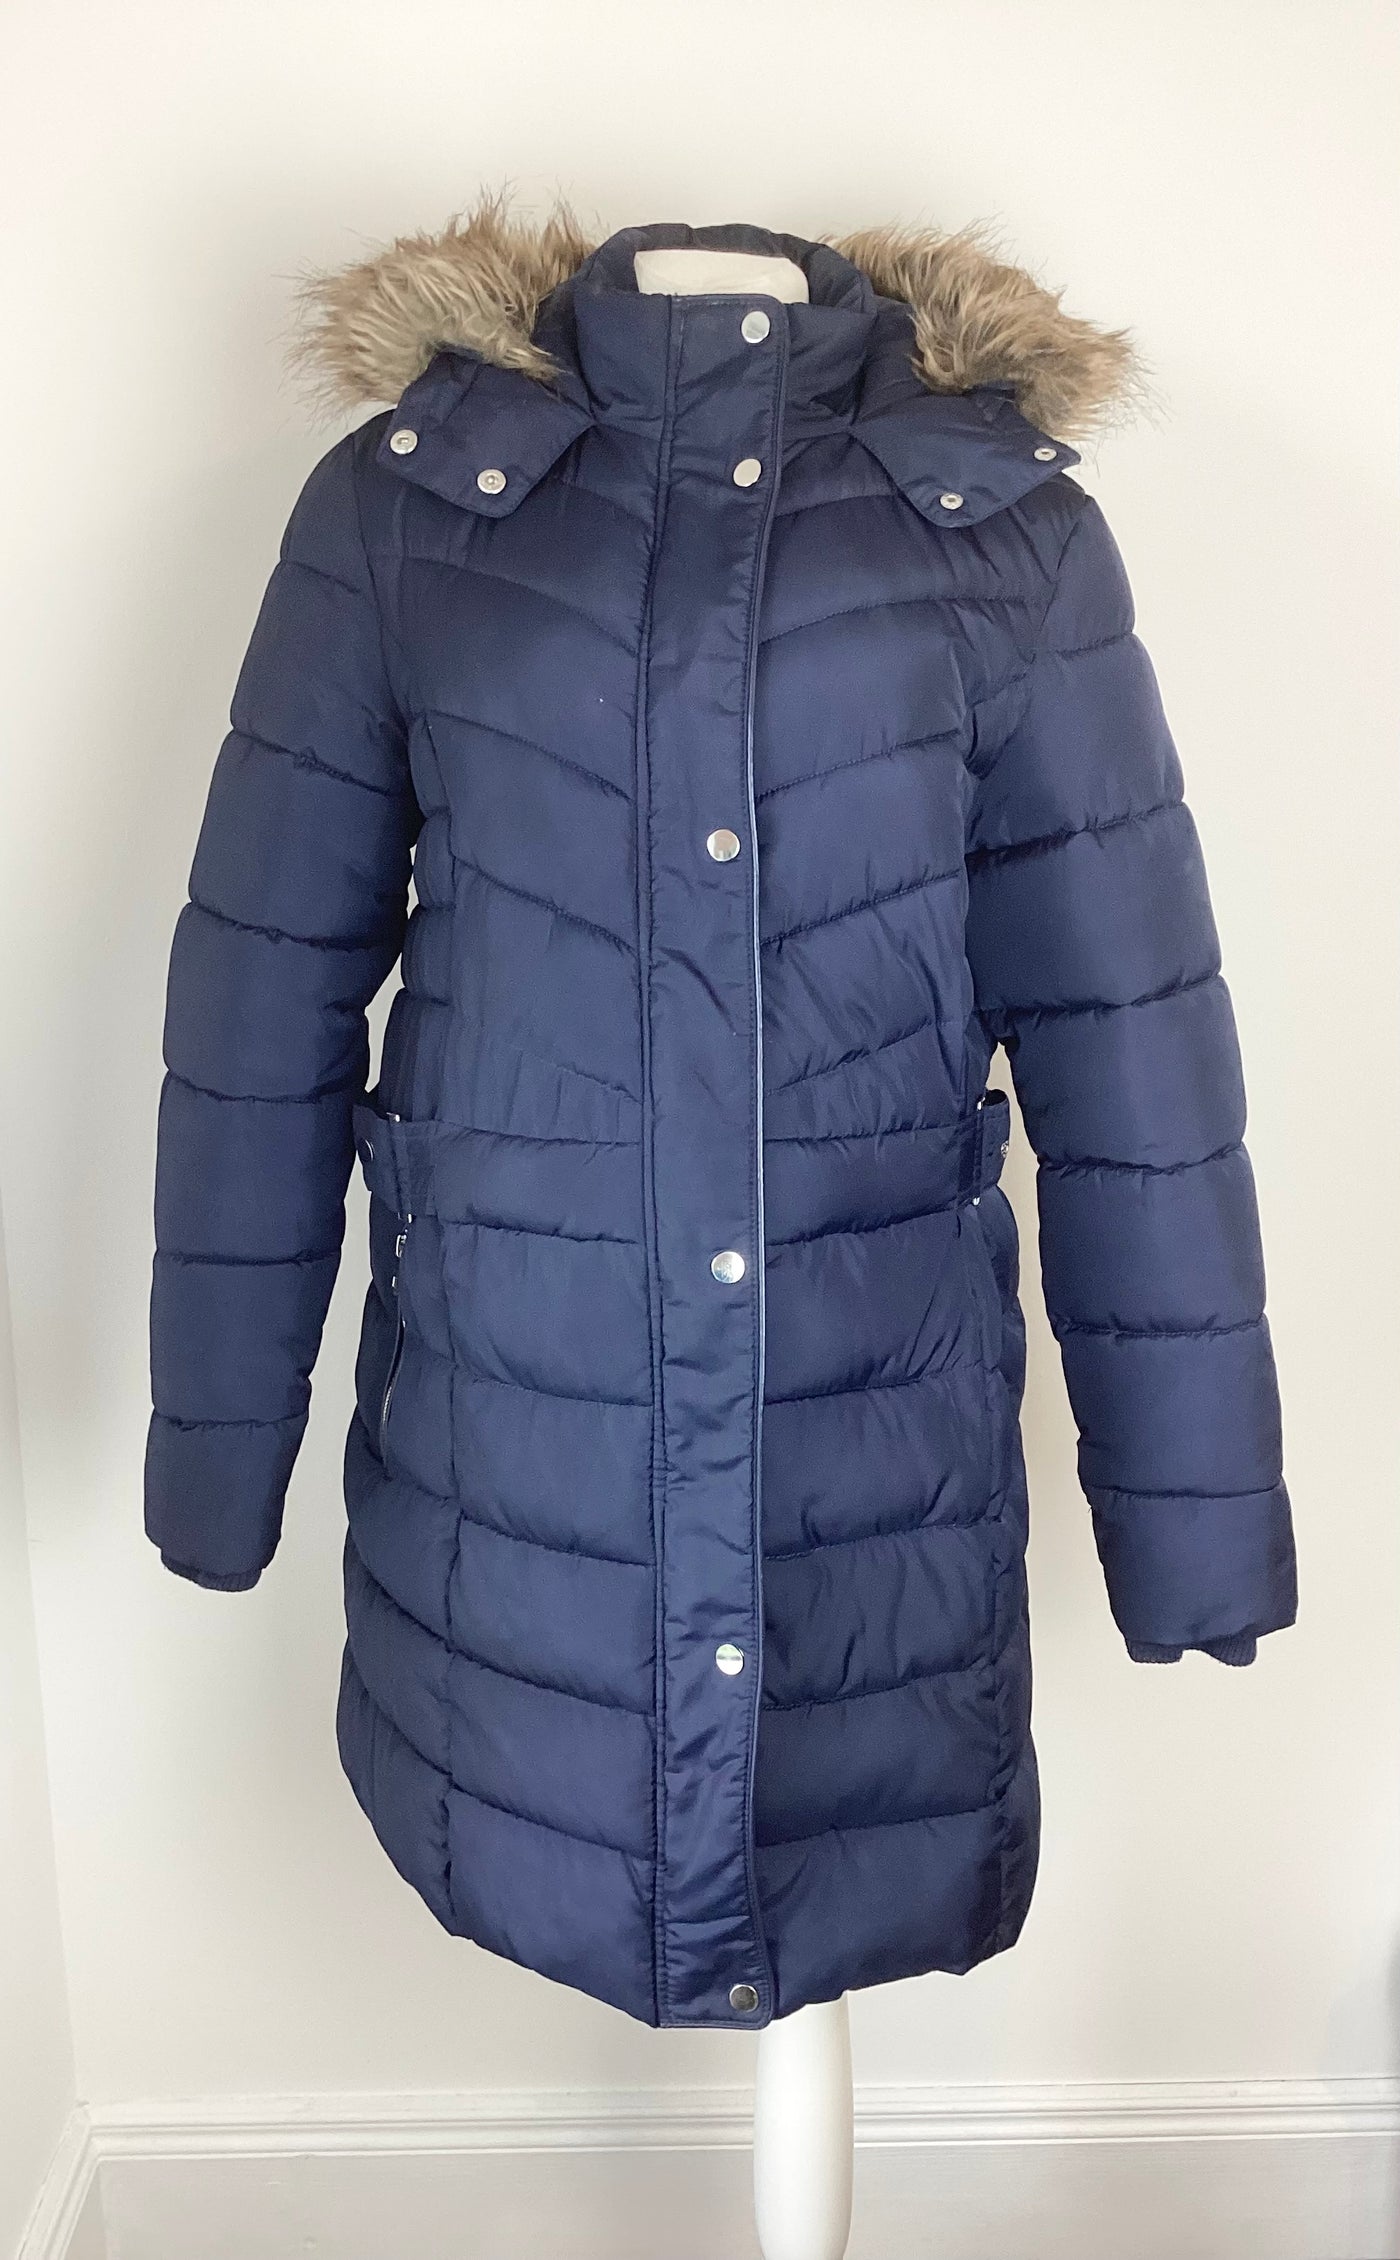 New Look Maternity navy padded coat with fur hood - Size 12